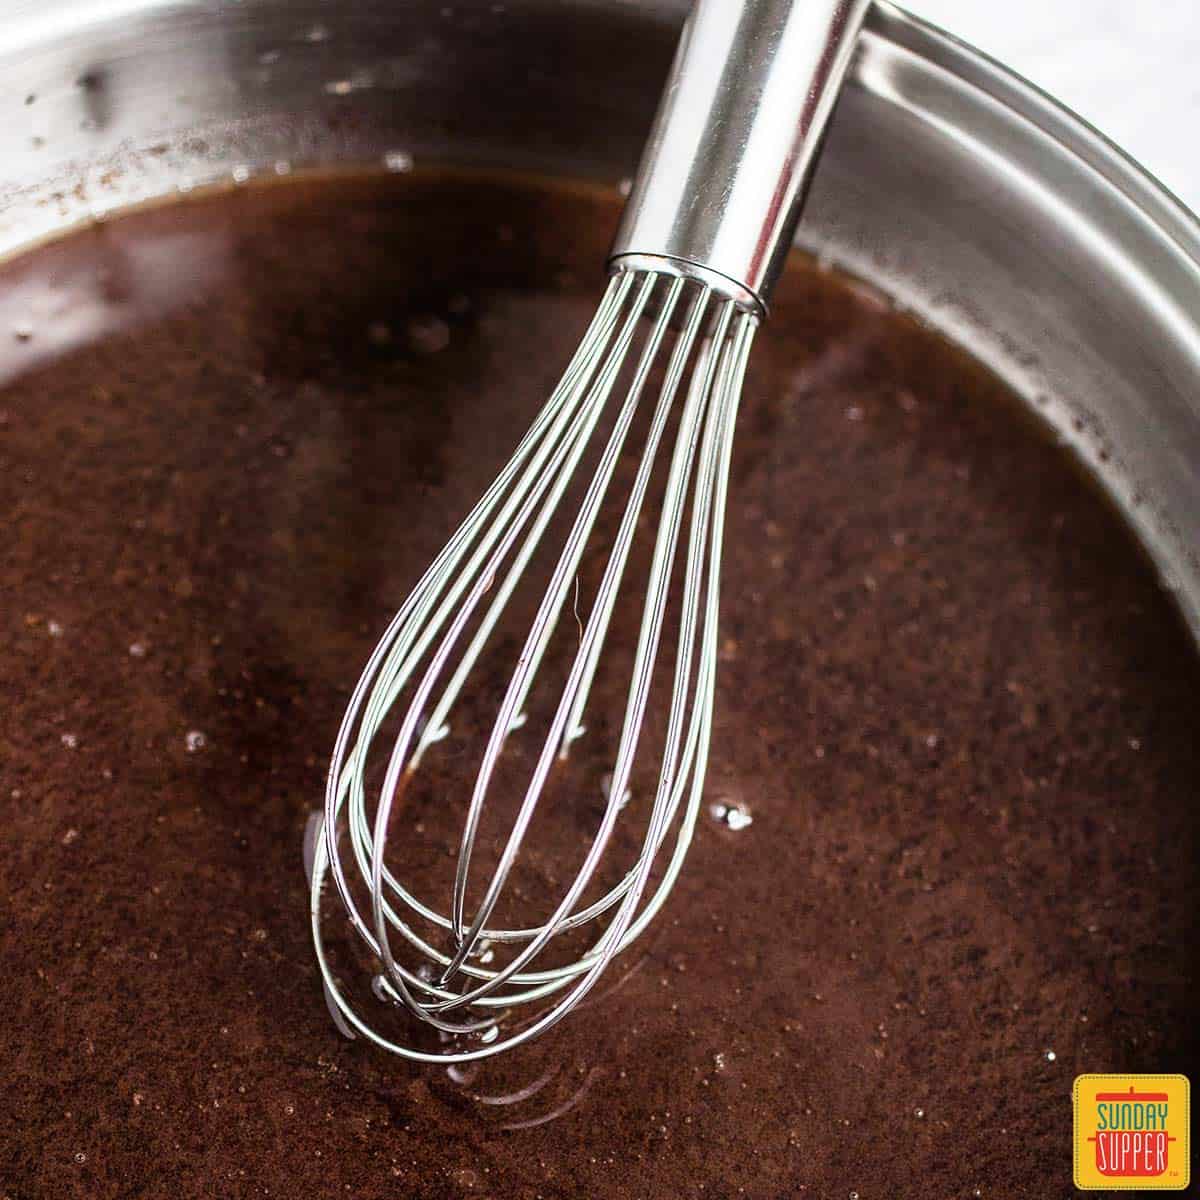 A whisk over a bowl of au jus